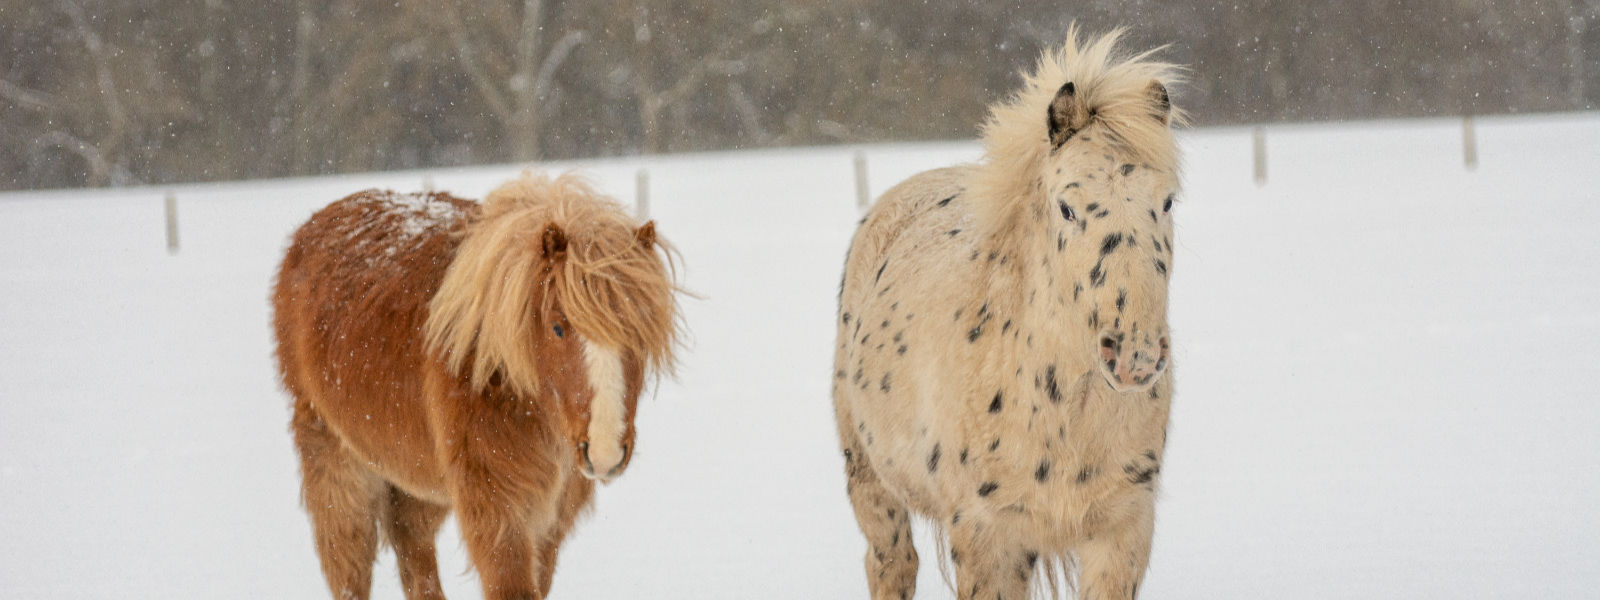 Two horses in the snow